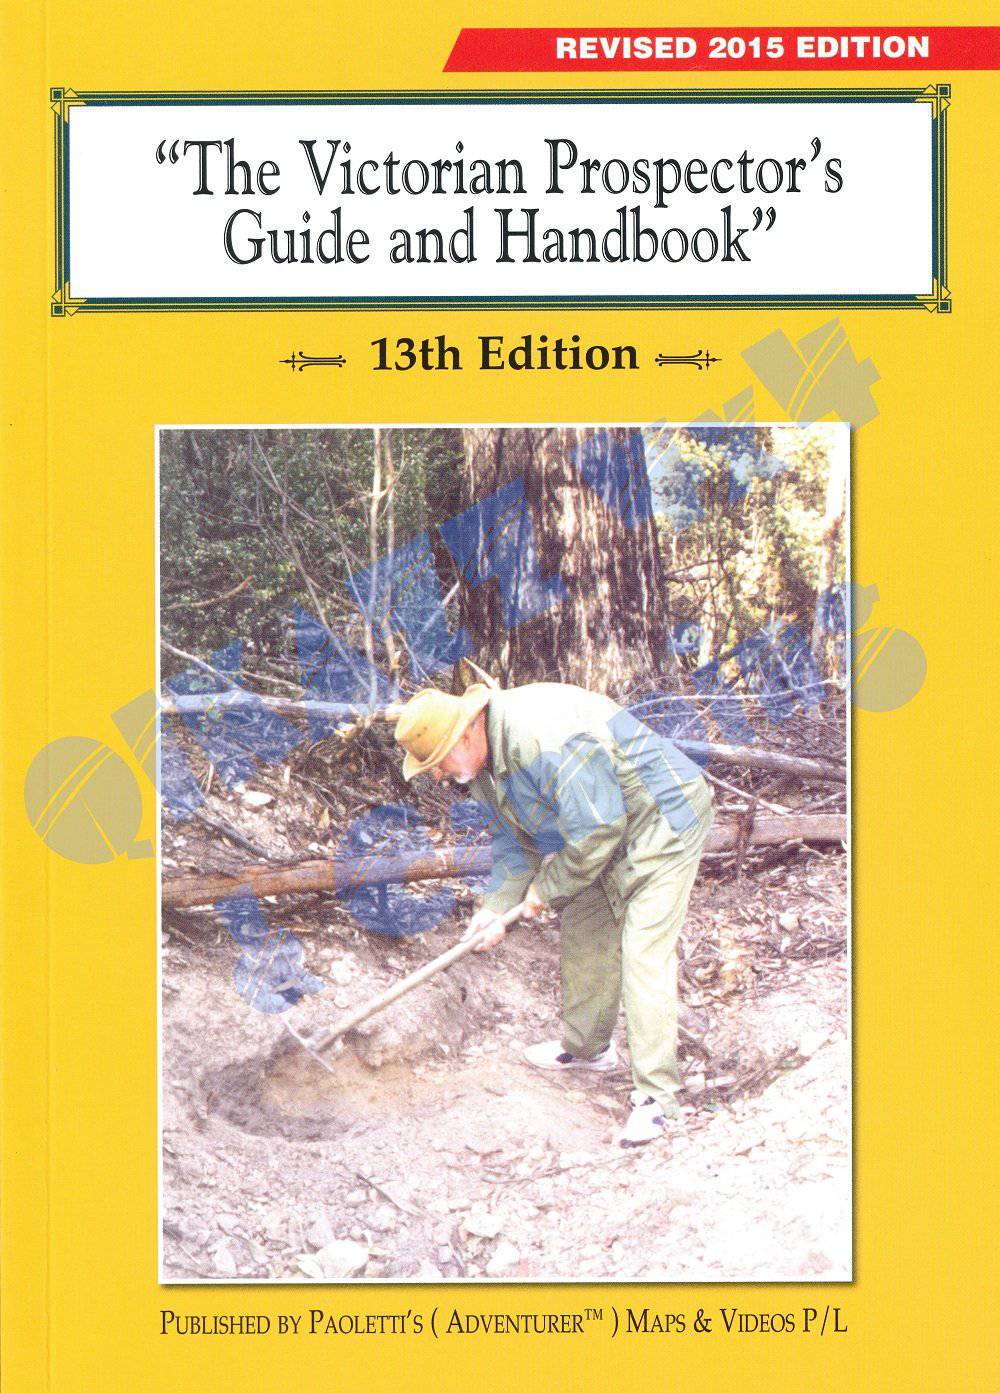 The Victorian Prospectors Guide and Handbook 2015 (13th Edition) | Adventurer Maps